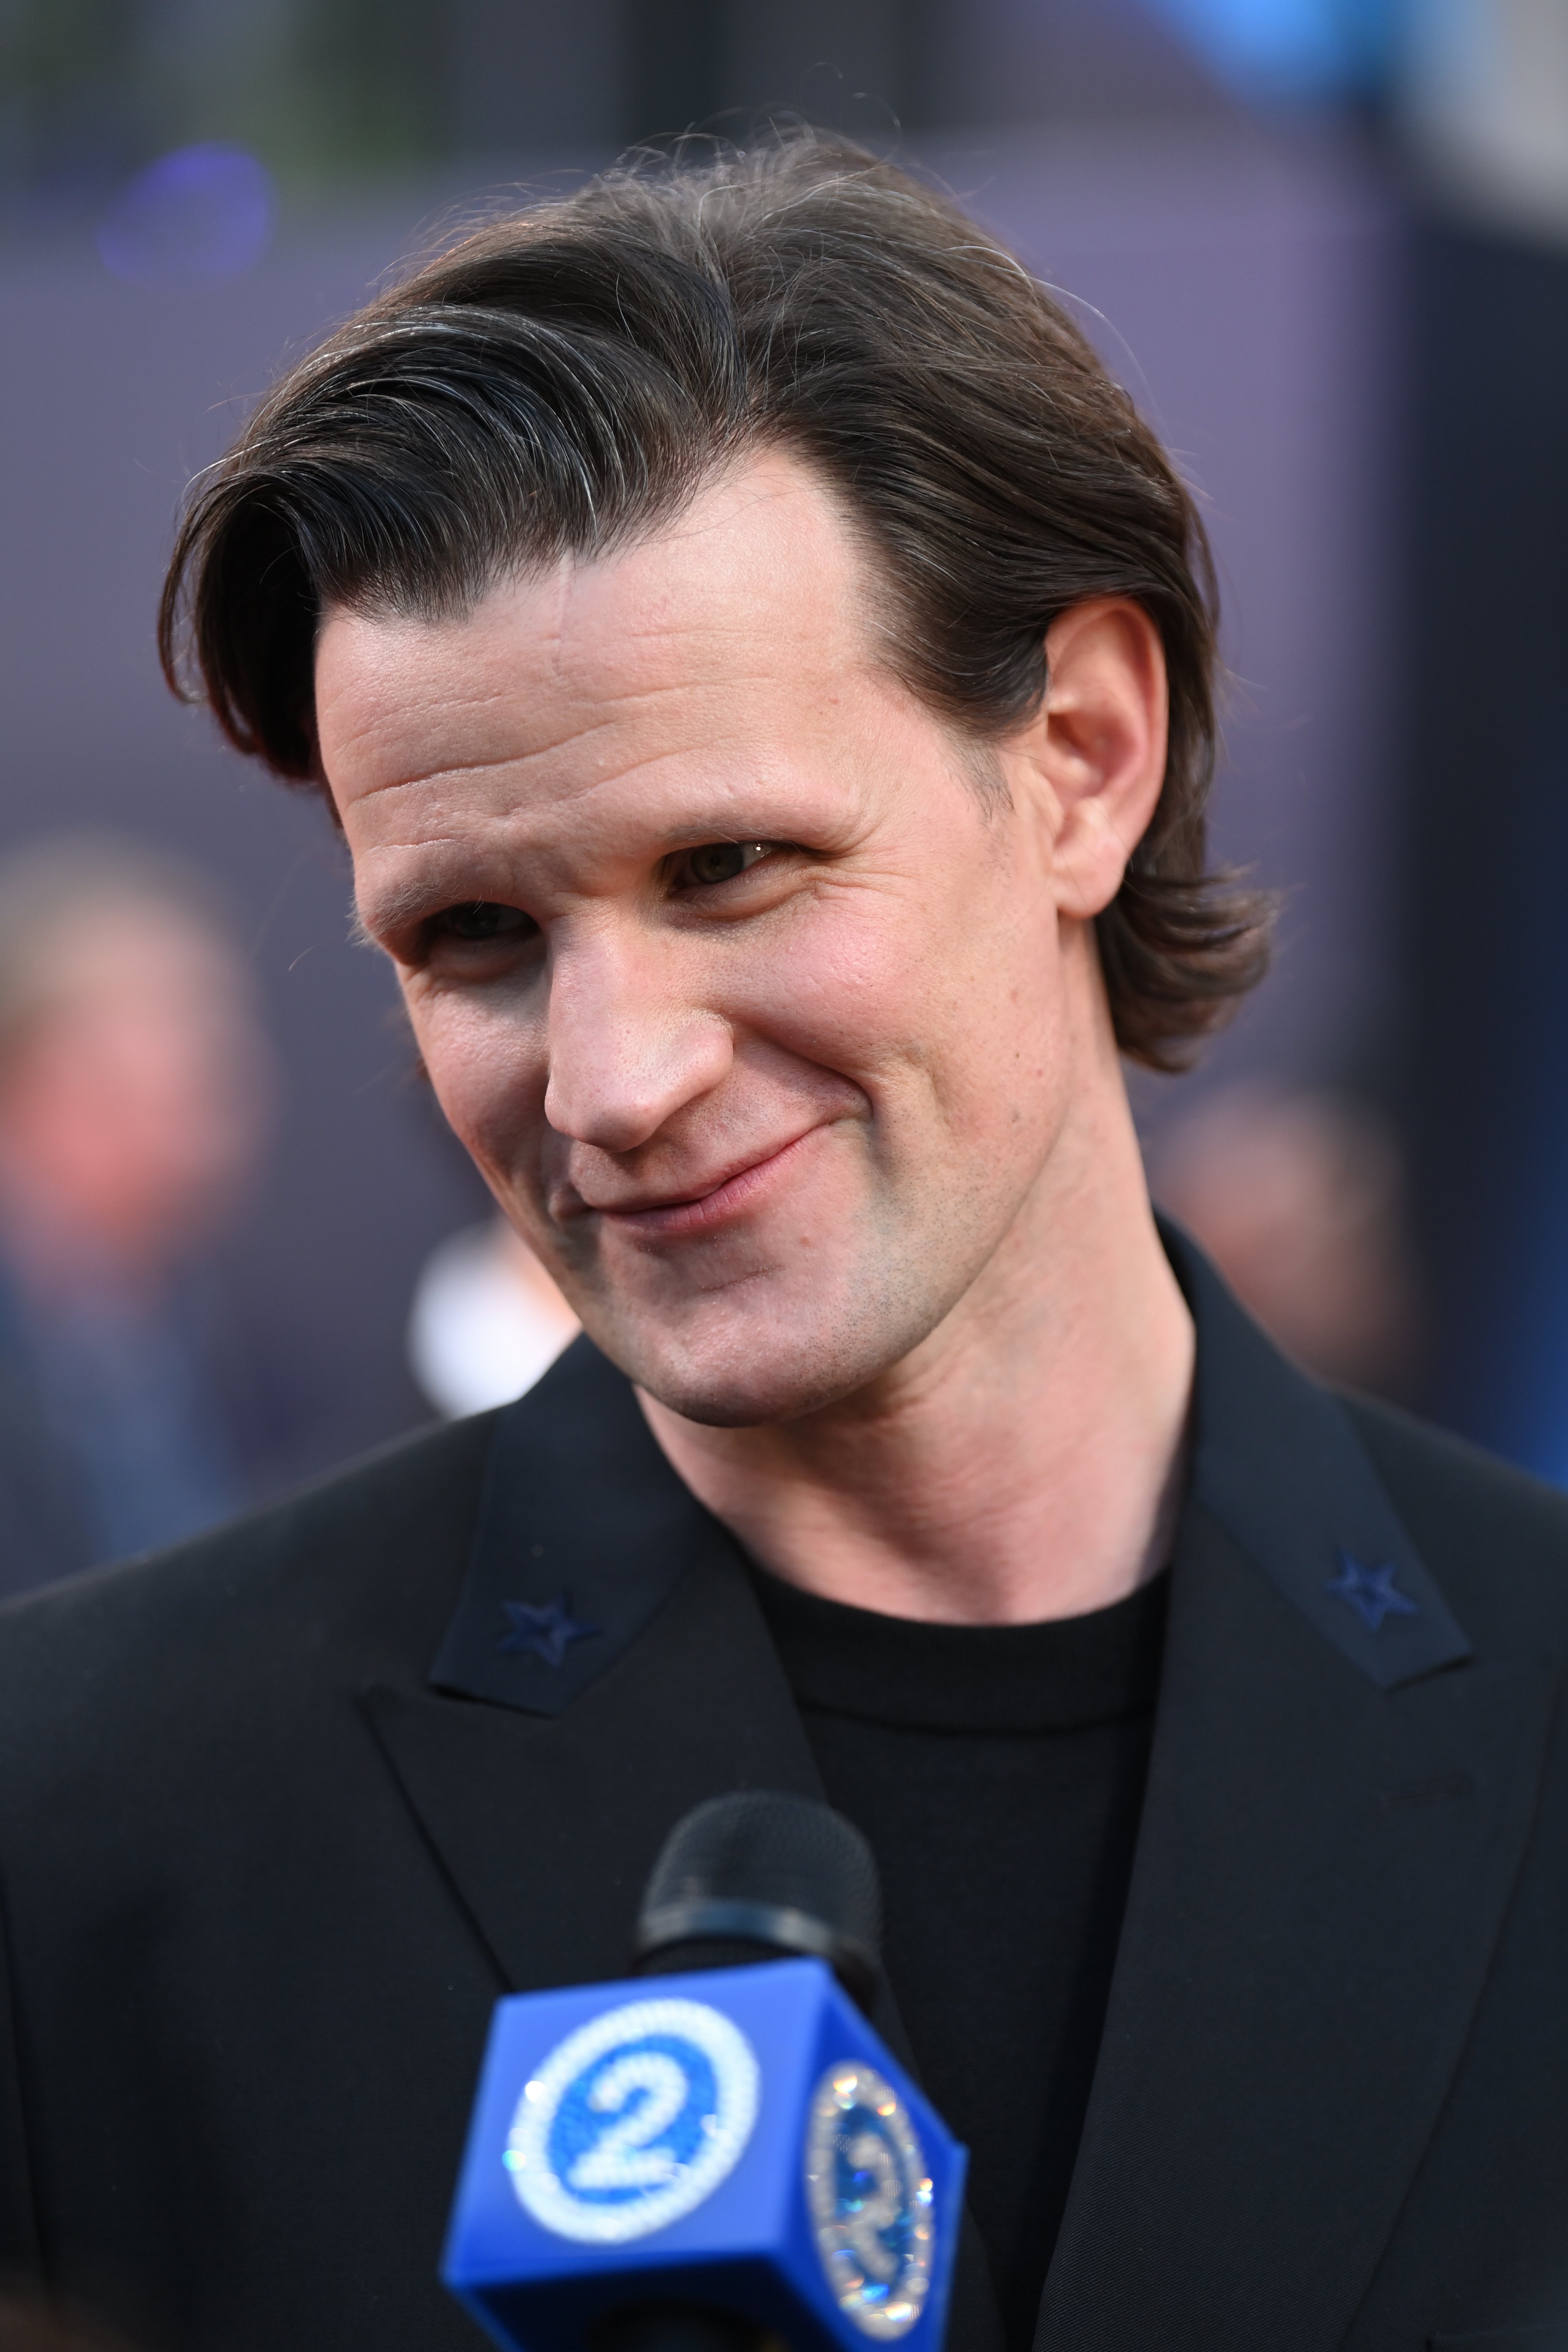 Matt Smith at the "Last Night In Soho" UK Premiere during the 65th BFI London Film Festival at The Royal Festival Hall on October 09, 2021 in London, England. | Source: Getty Images